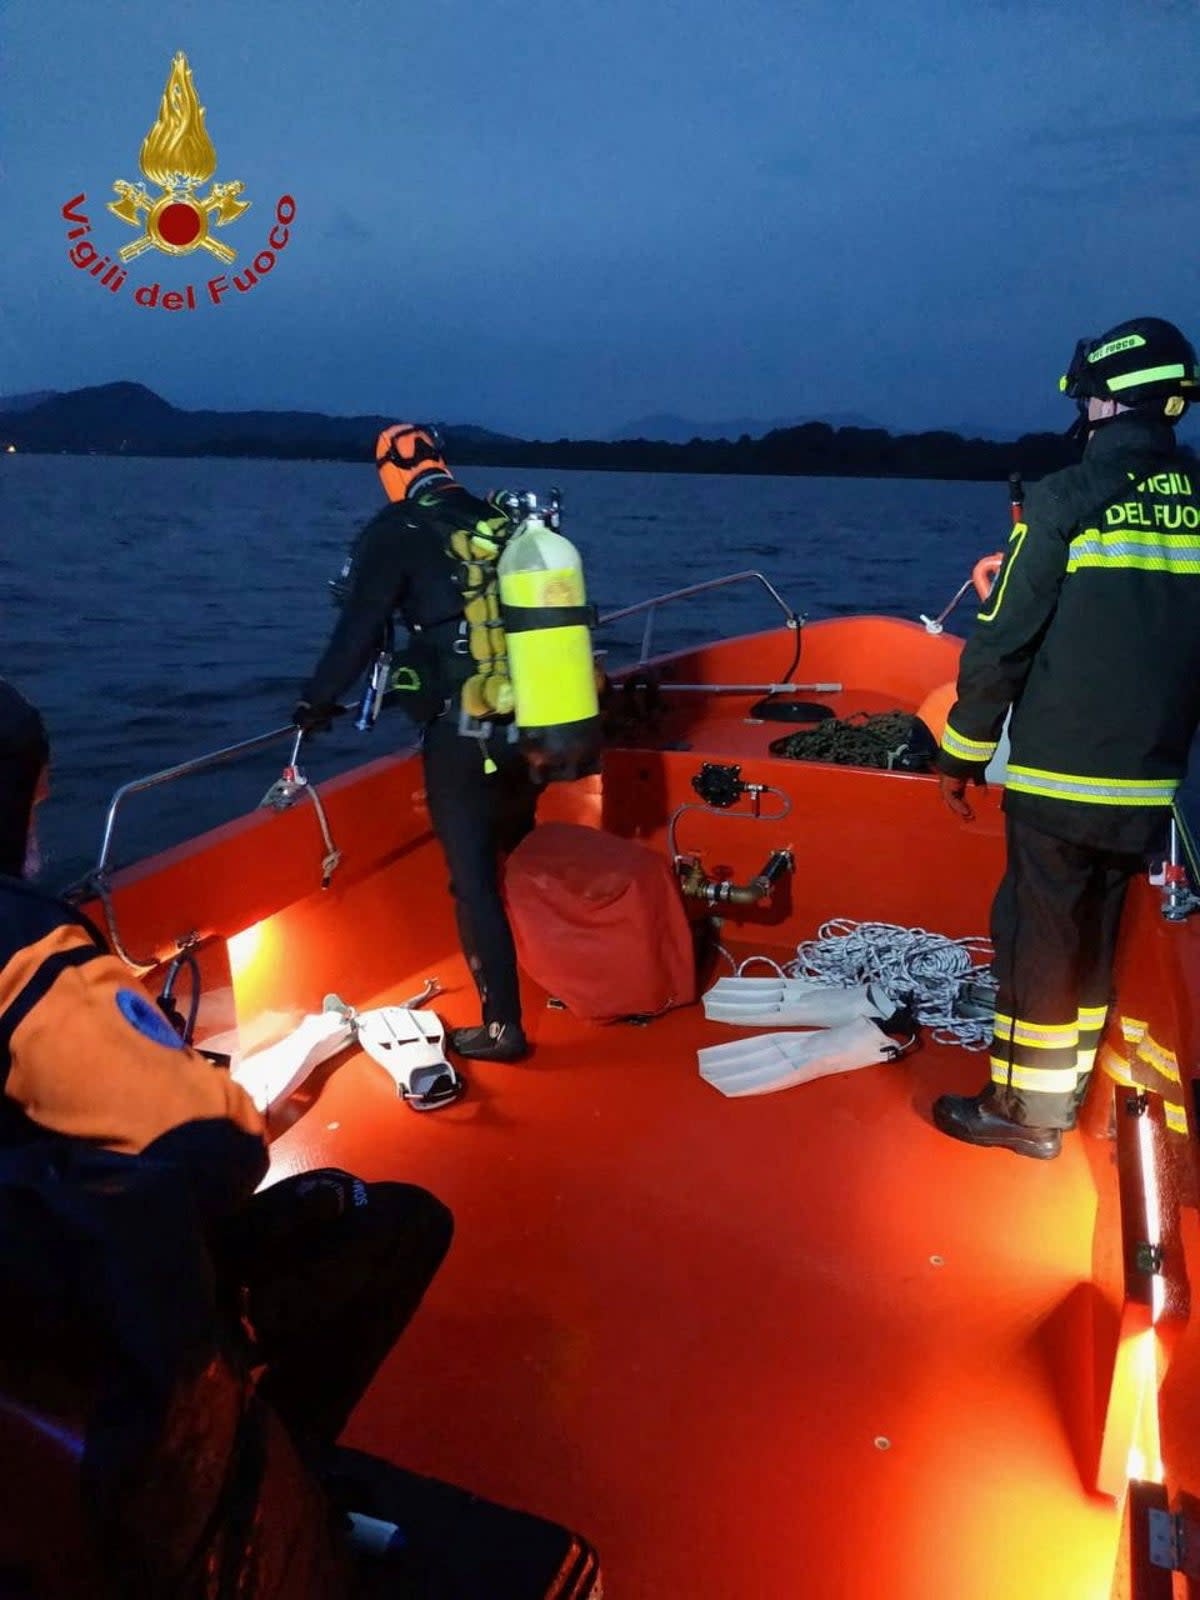 Firefighters search for survivors after the tourist boat capsized in Lake Maggiore (via REUTERS)